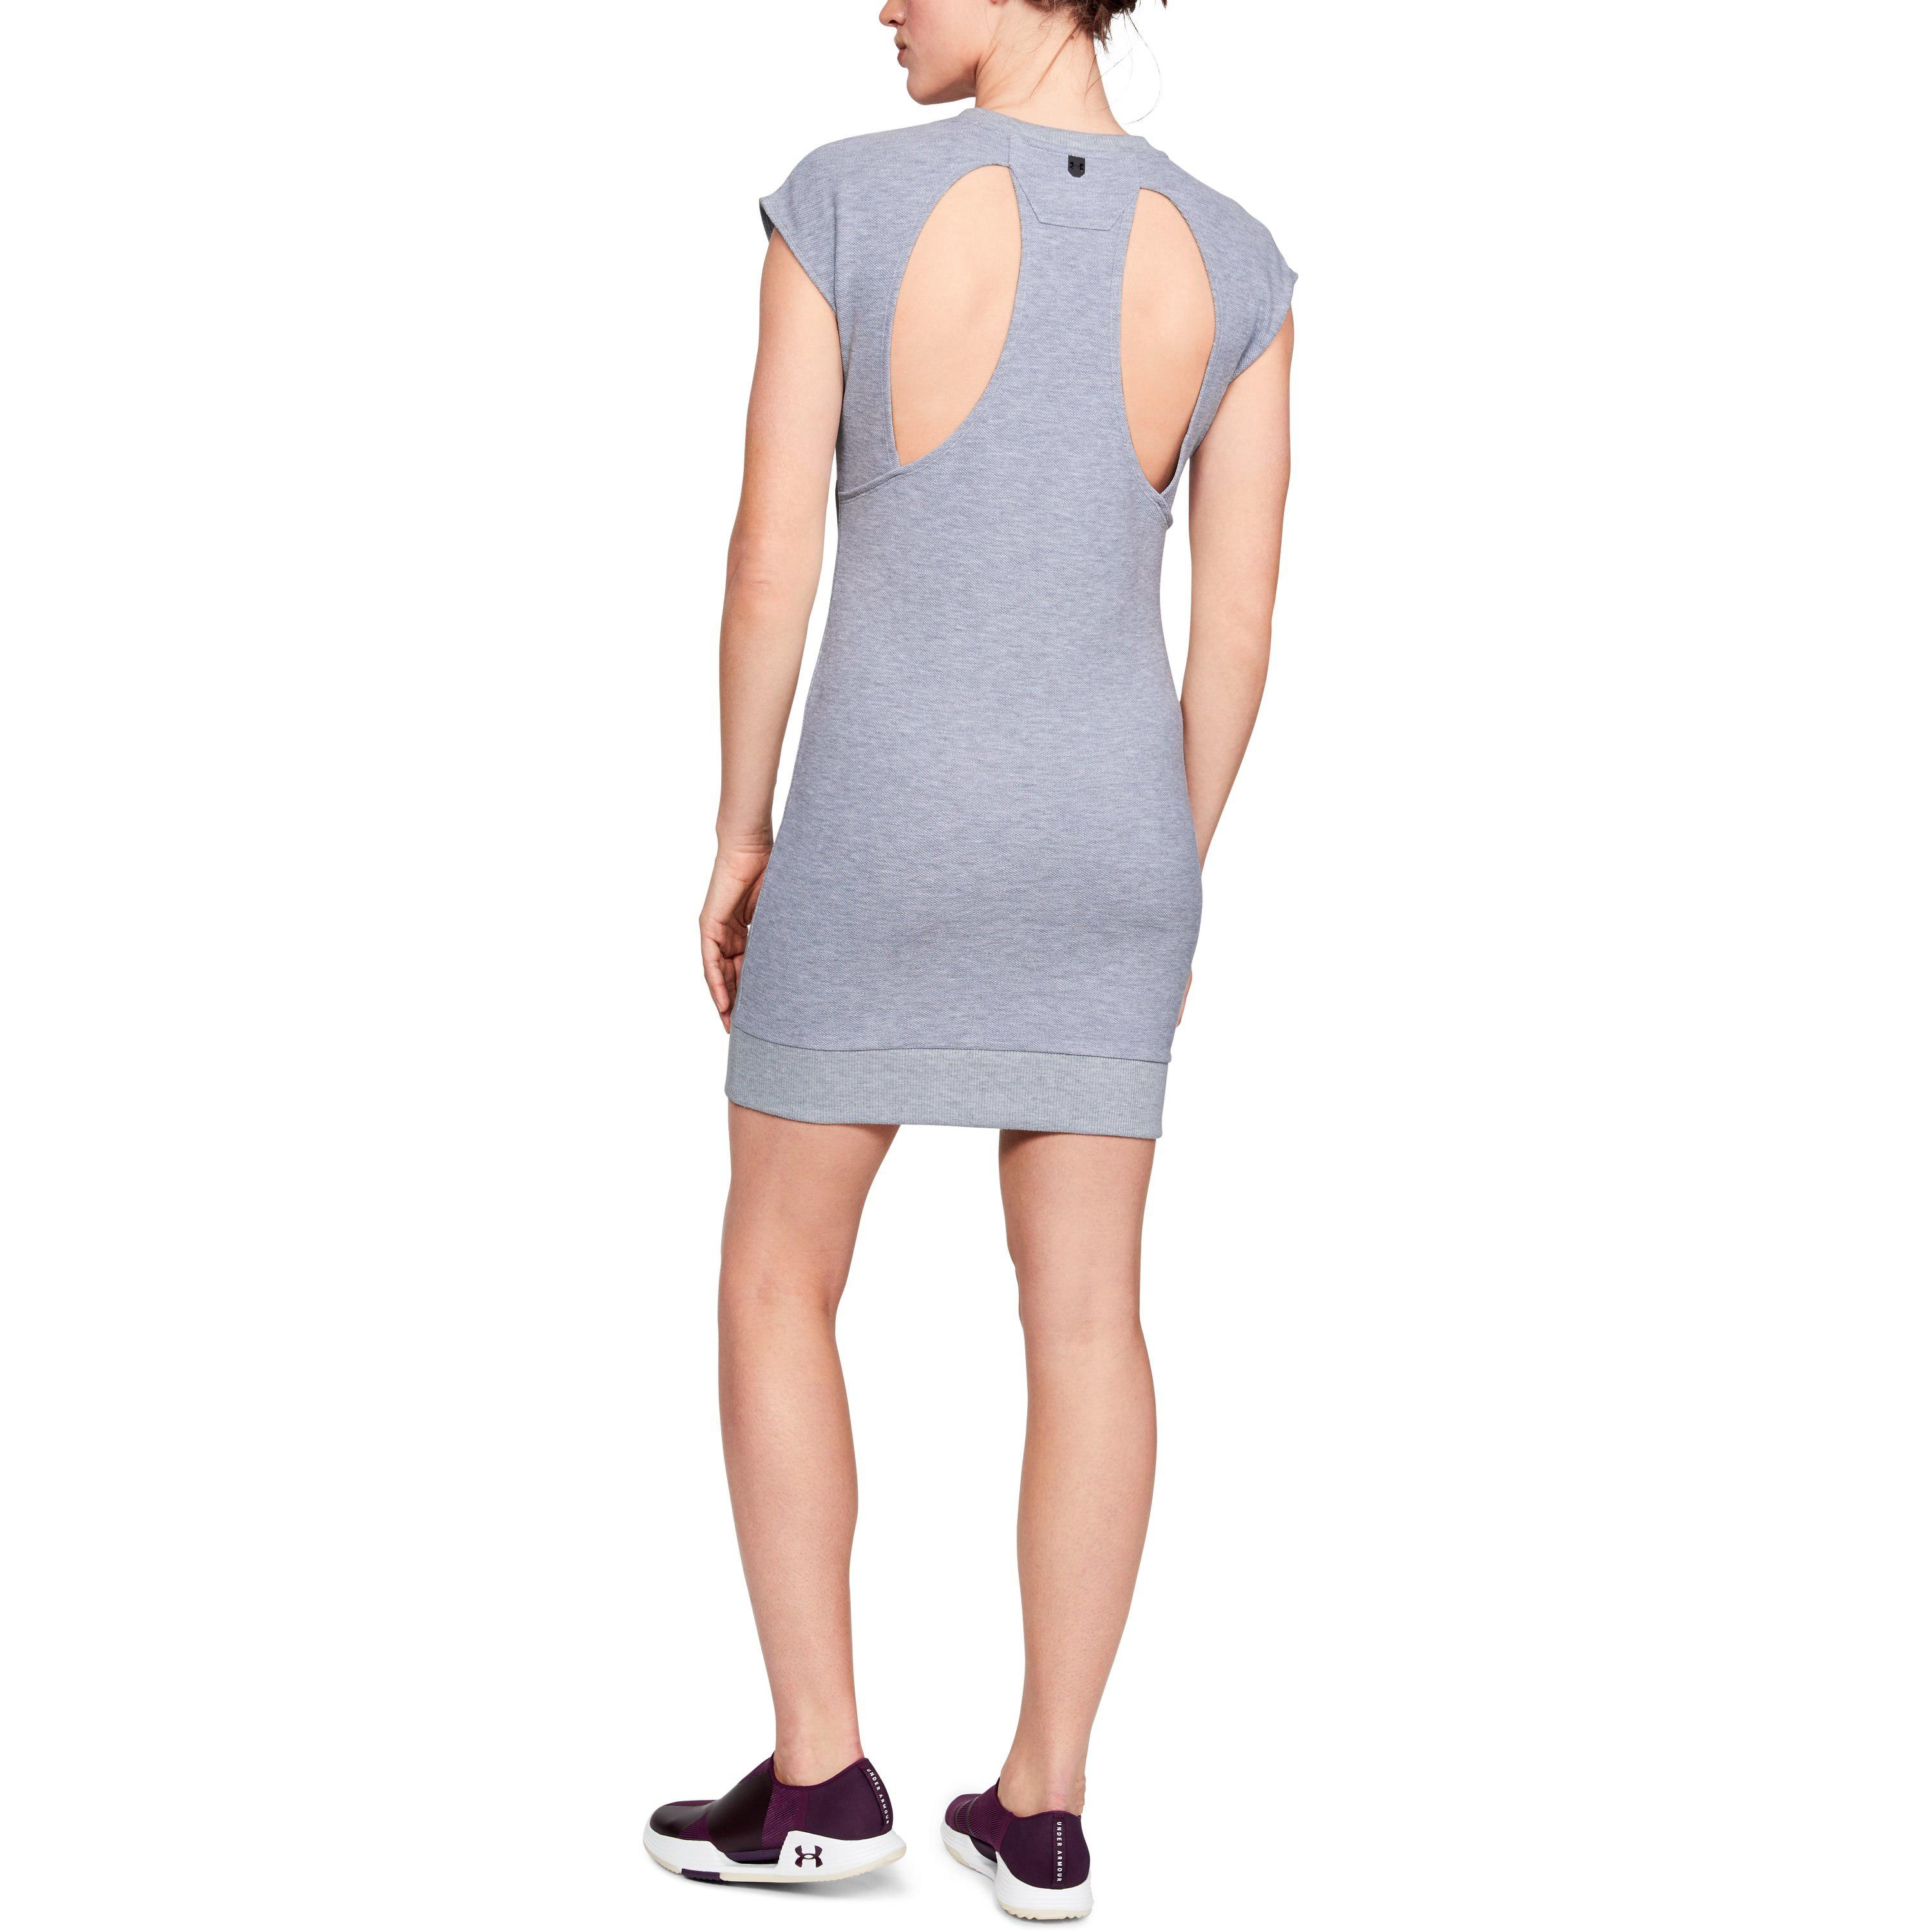 Under Armour Unstoppable Dress in Gray 